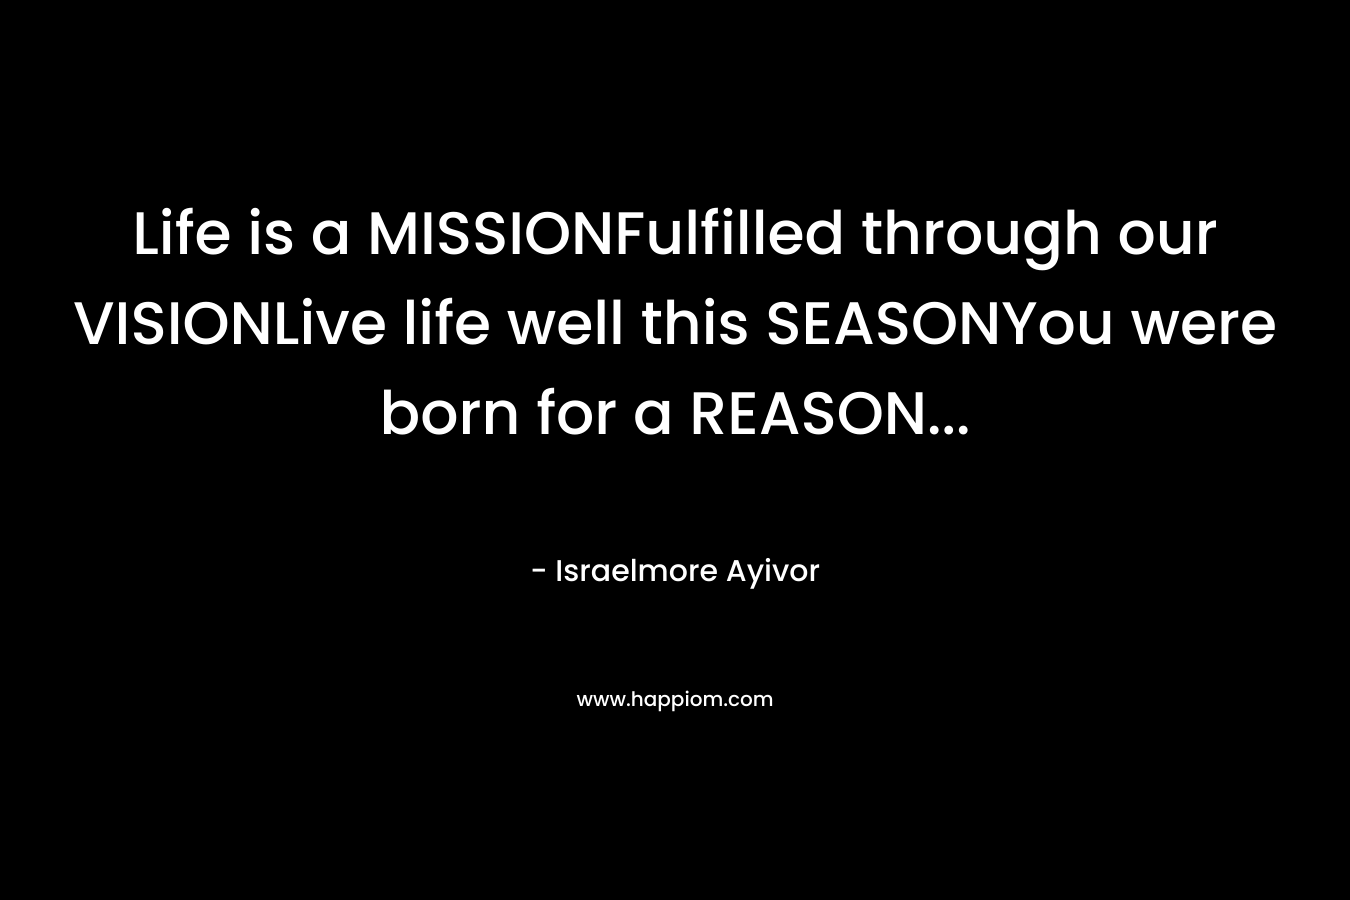 Life is a MISSIONFulfilled through our VISIONLive life well this SEASONYou were born for a REASON… – Israelmore Ayivor